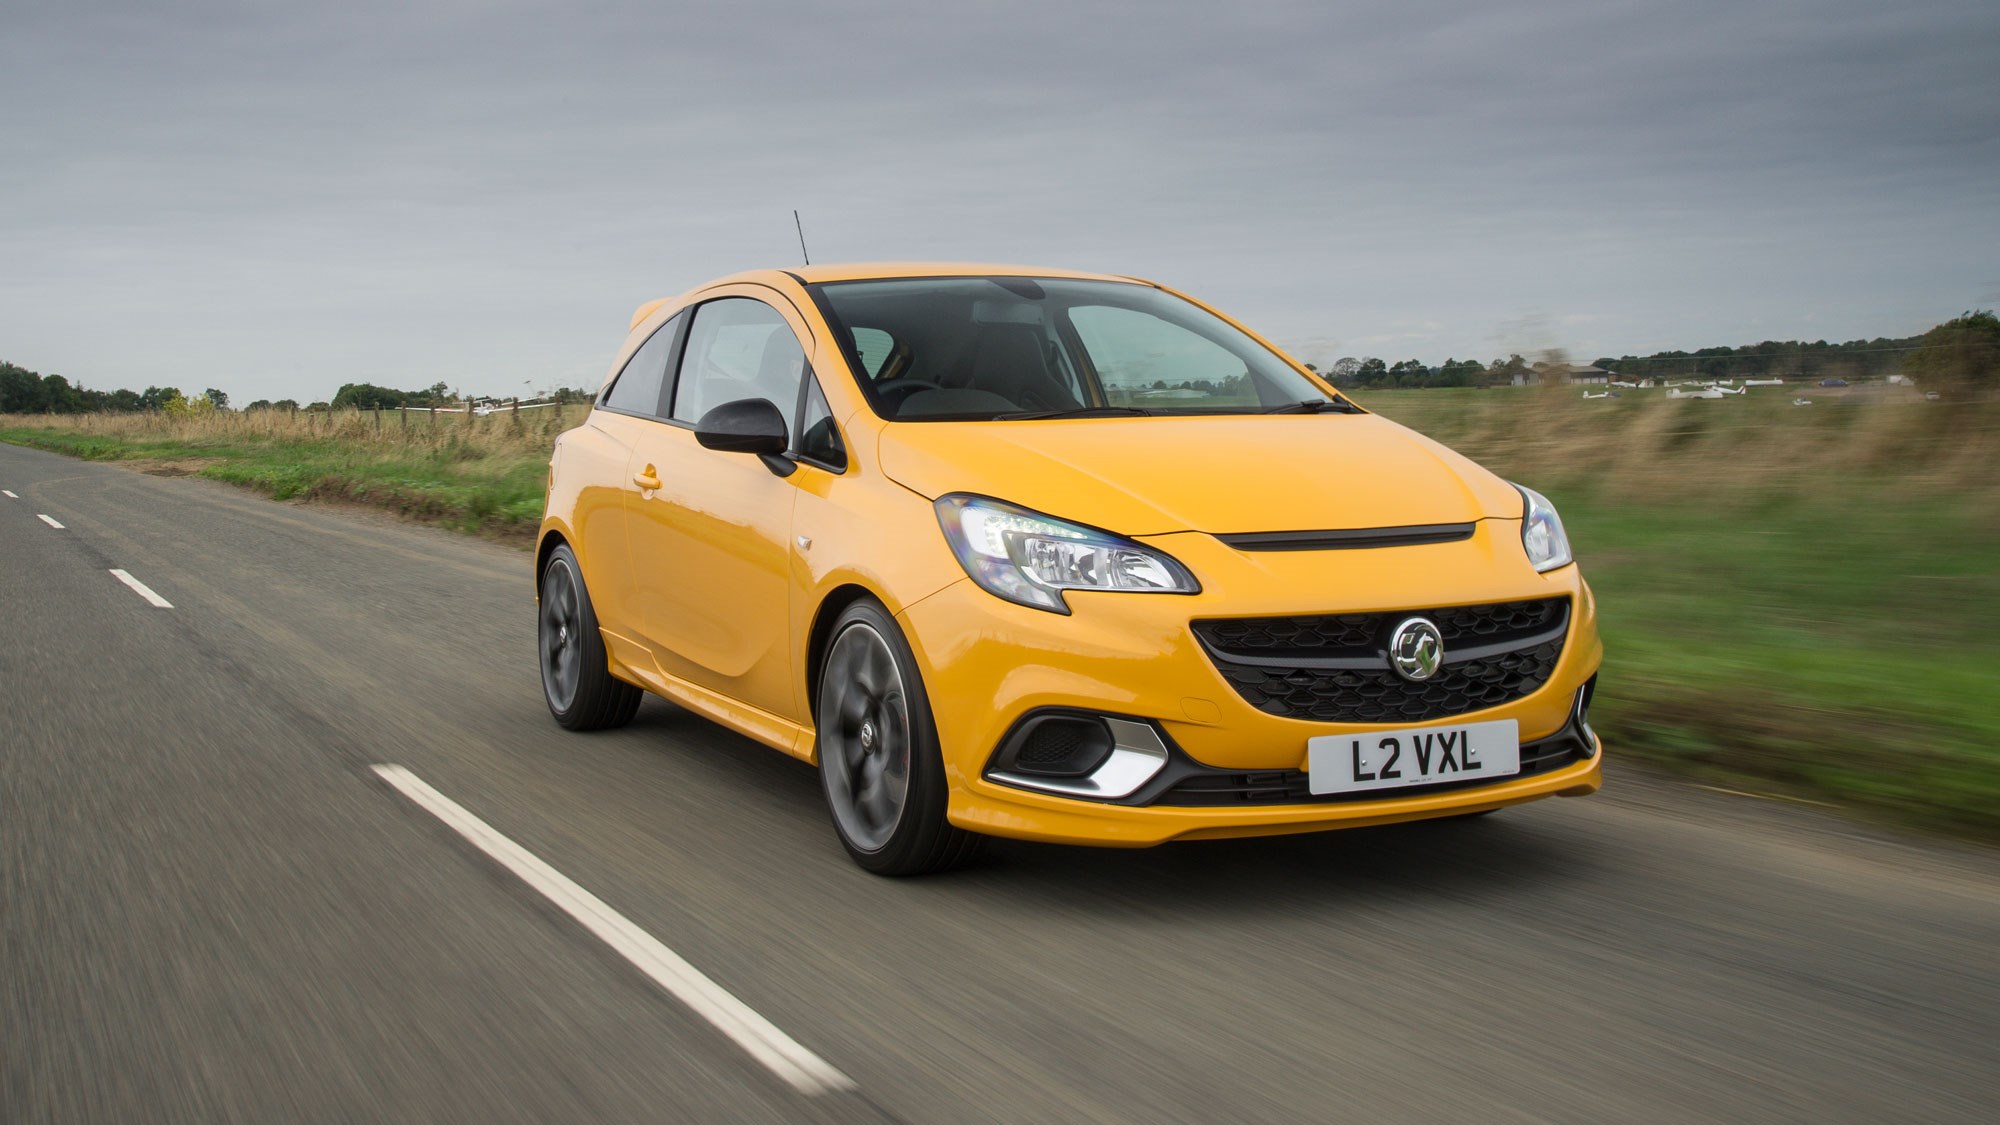 Opel Corsa 1.4 Turbo Sport (2018) Quick Review